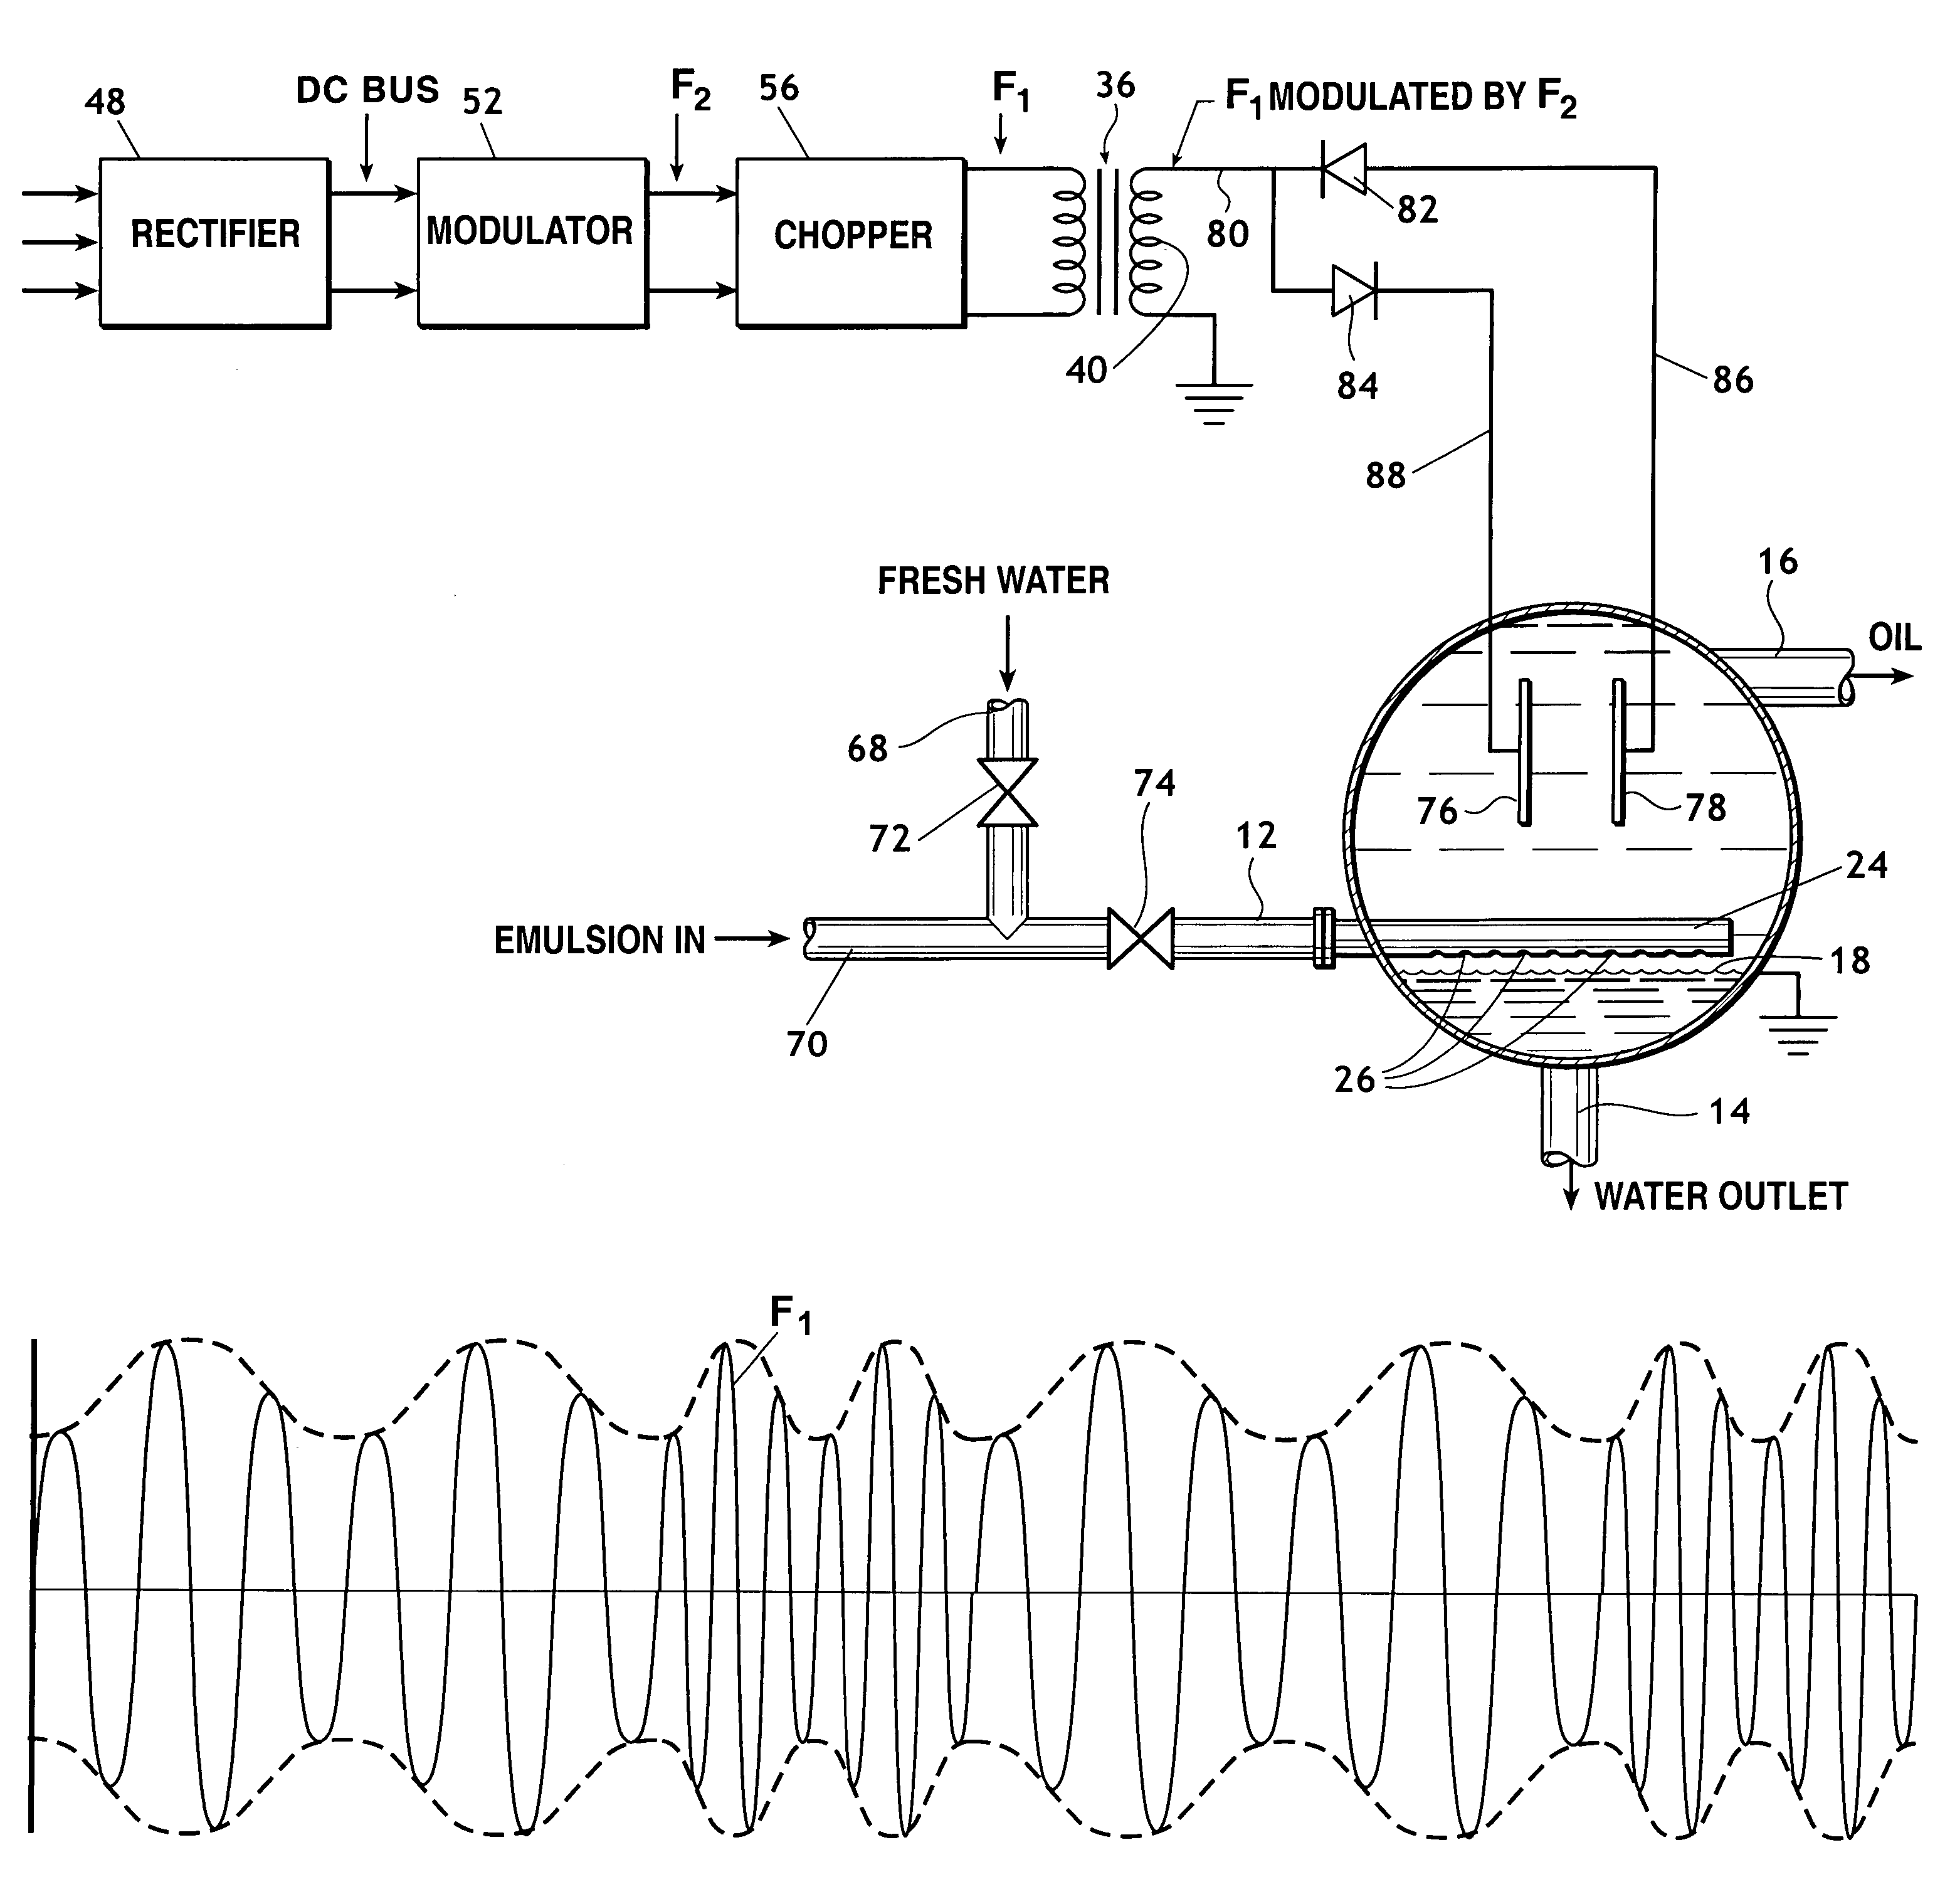 Multiple frequency electrostatic coalescence